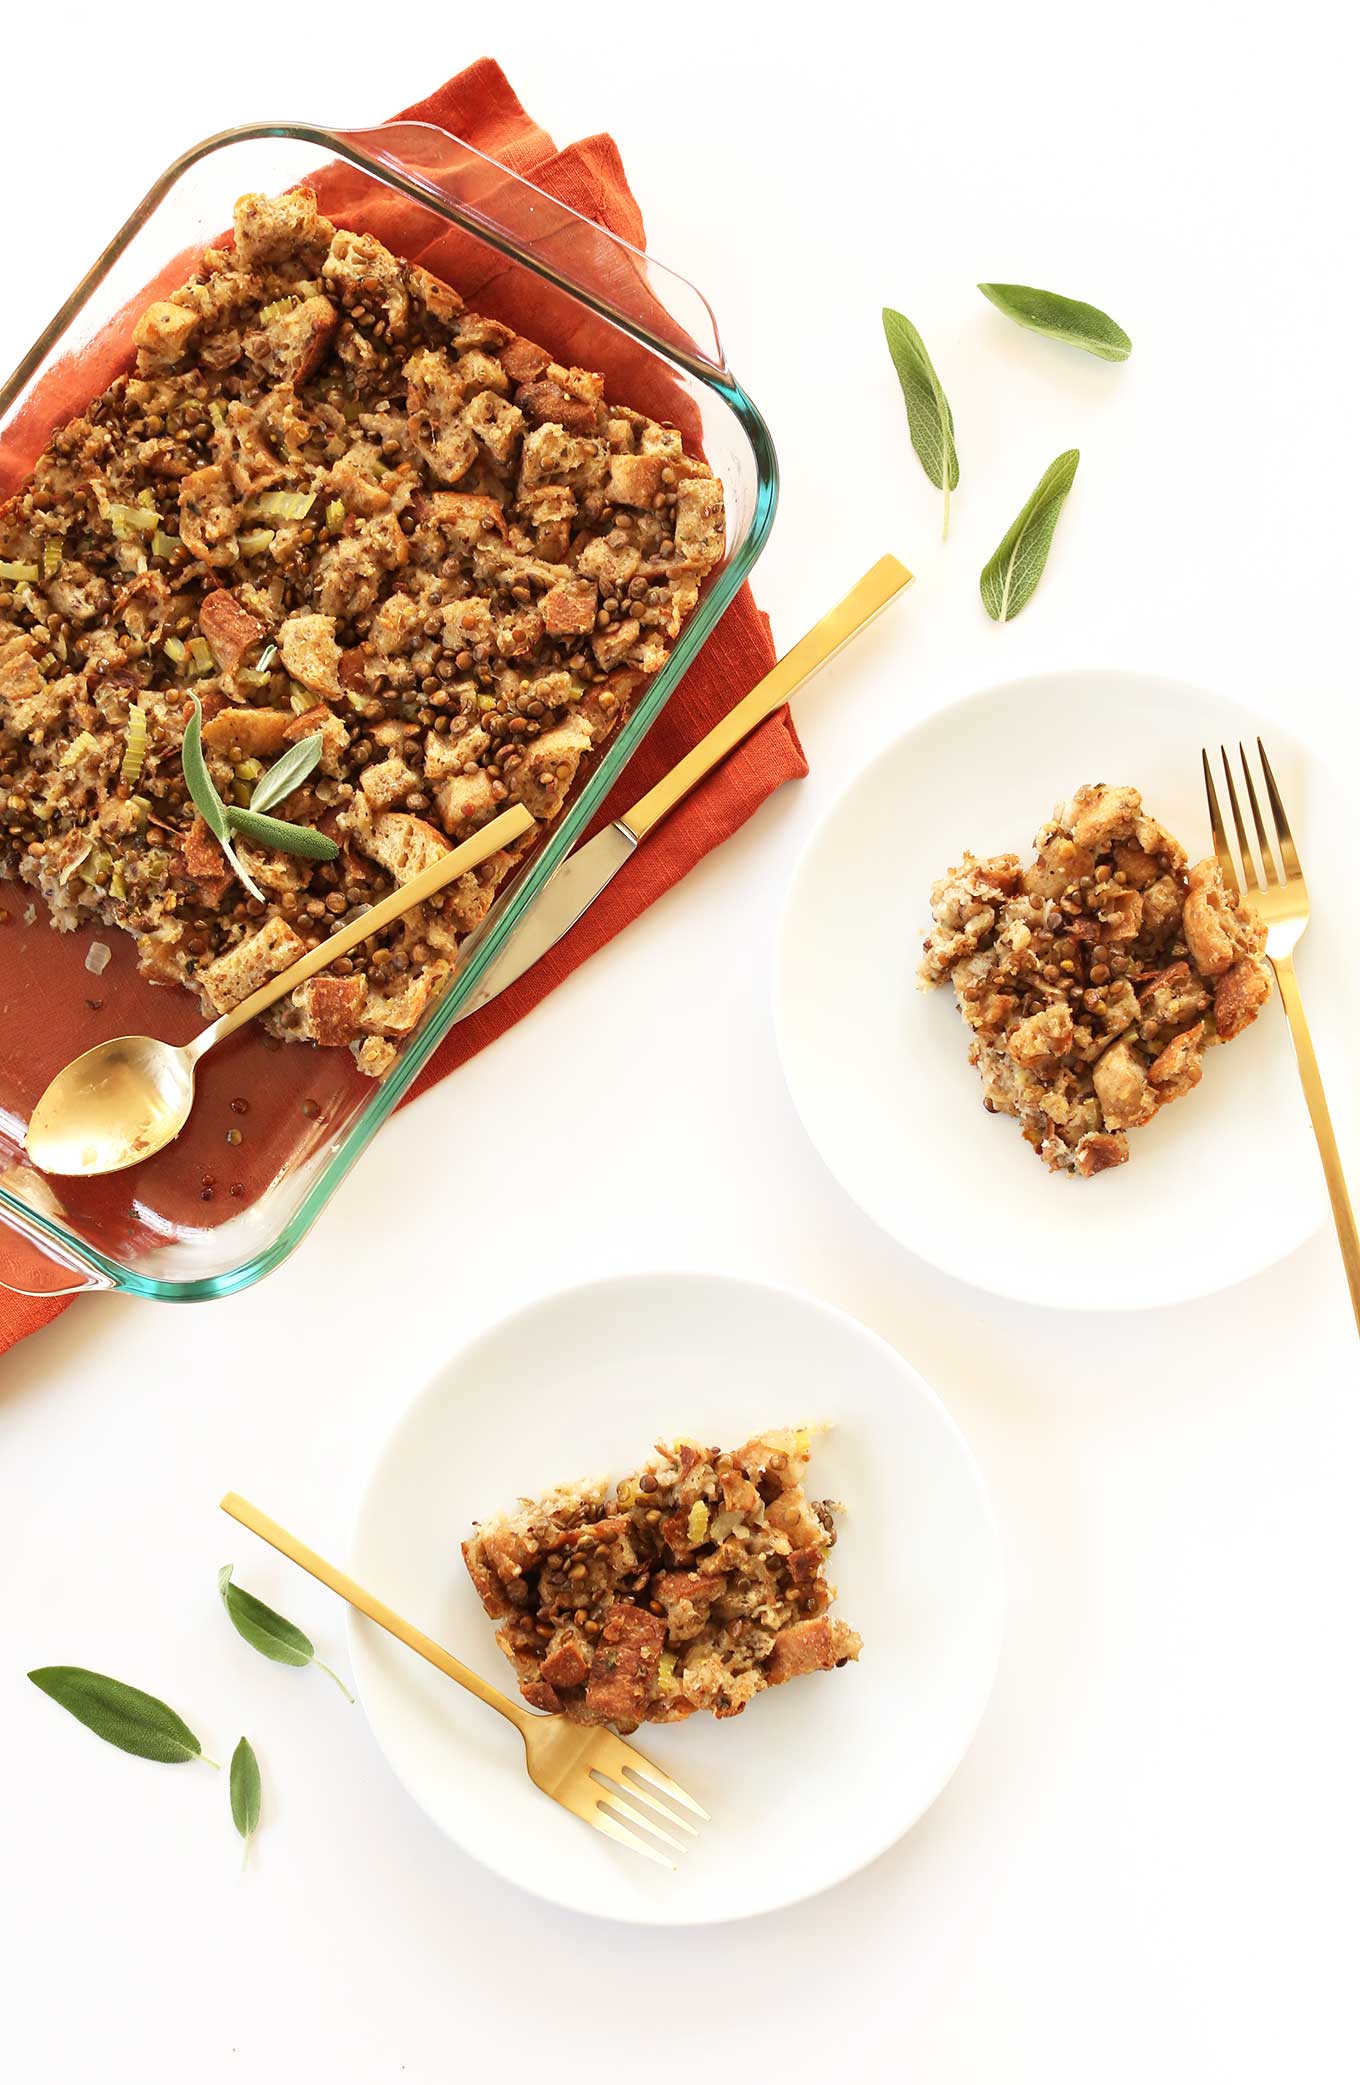 Two plates and a baking dish filled with hearty vegan stuffing